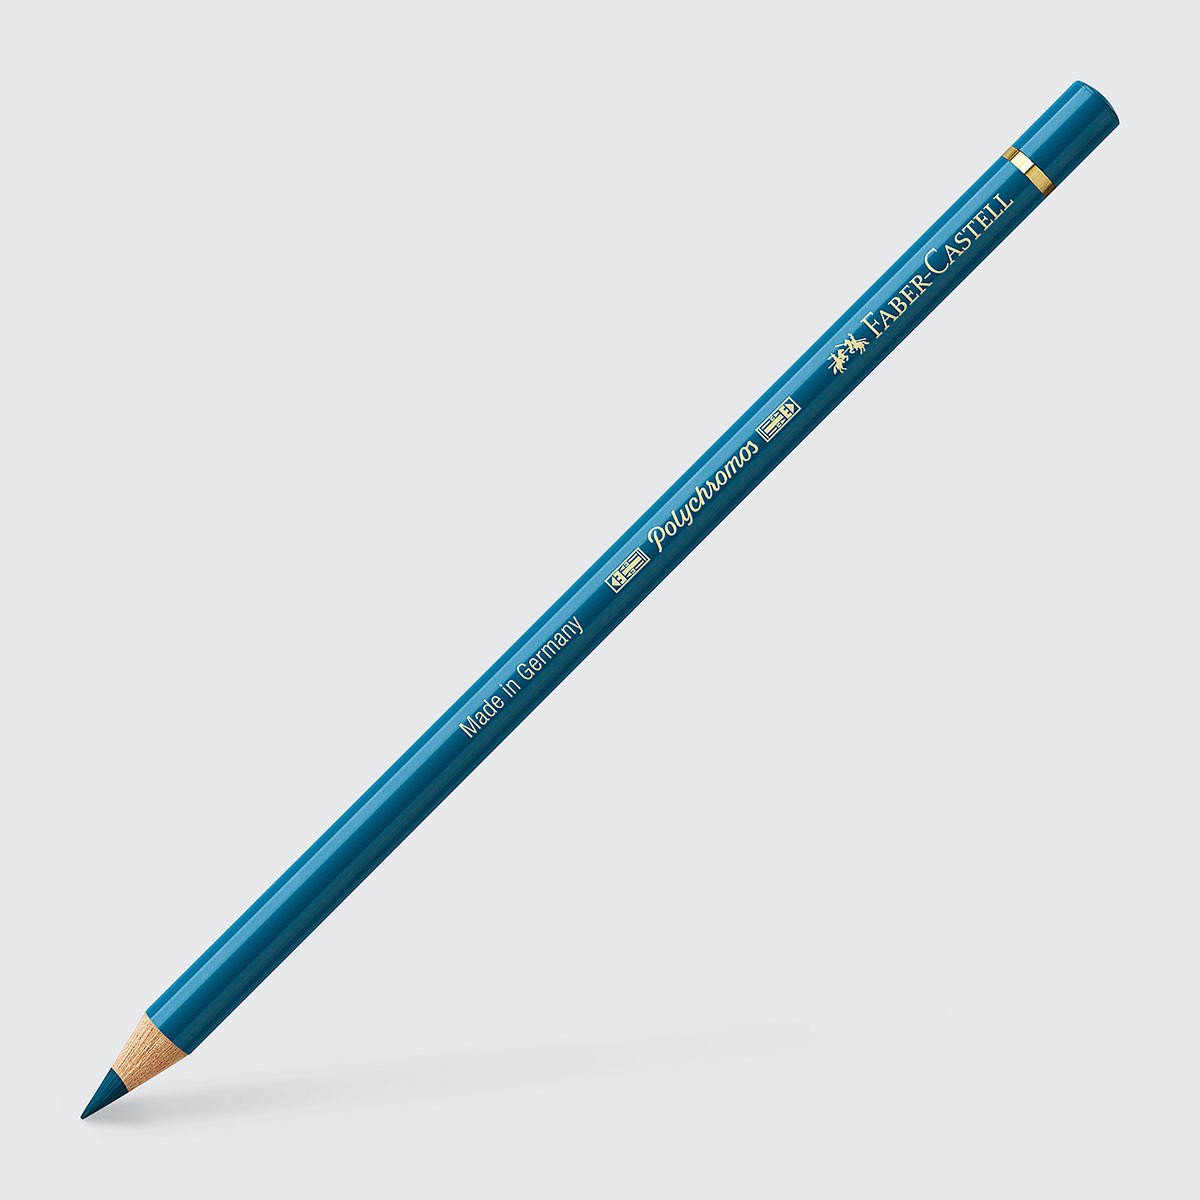 Faber-Castell Polychromos Artists’ Coloured Pencil One Size Helio Turquoise (155)